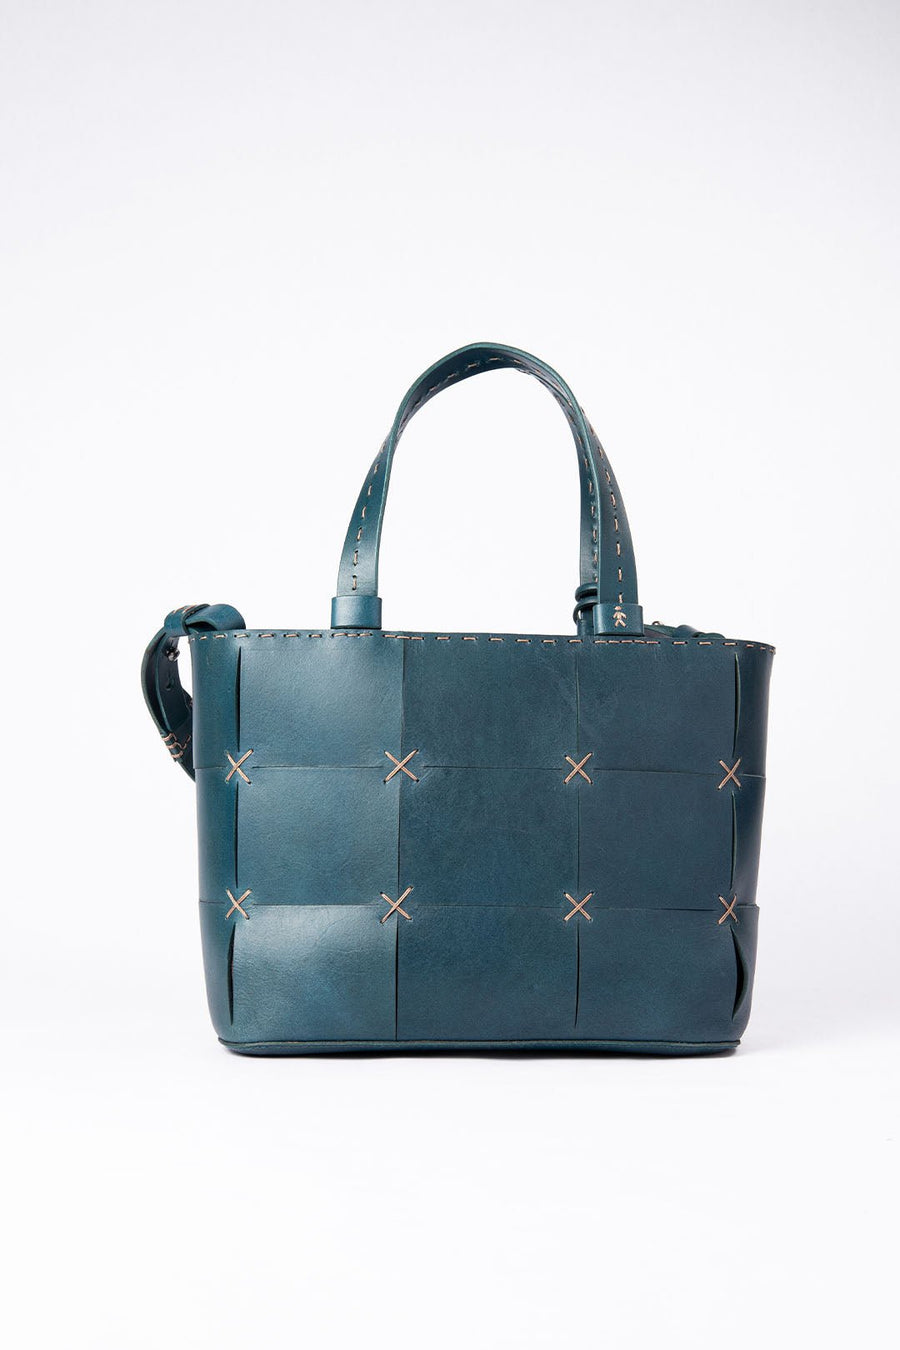 HENRY BEGUELIN PATCHWORK LEATHER BAG, TURQUOISE - Burning Torch Online Boutique